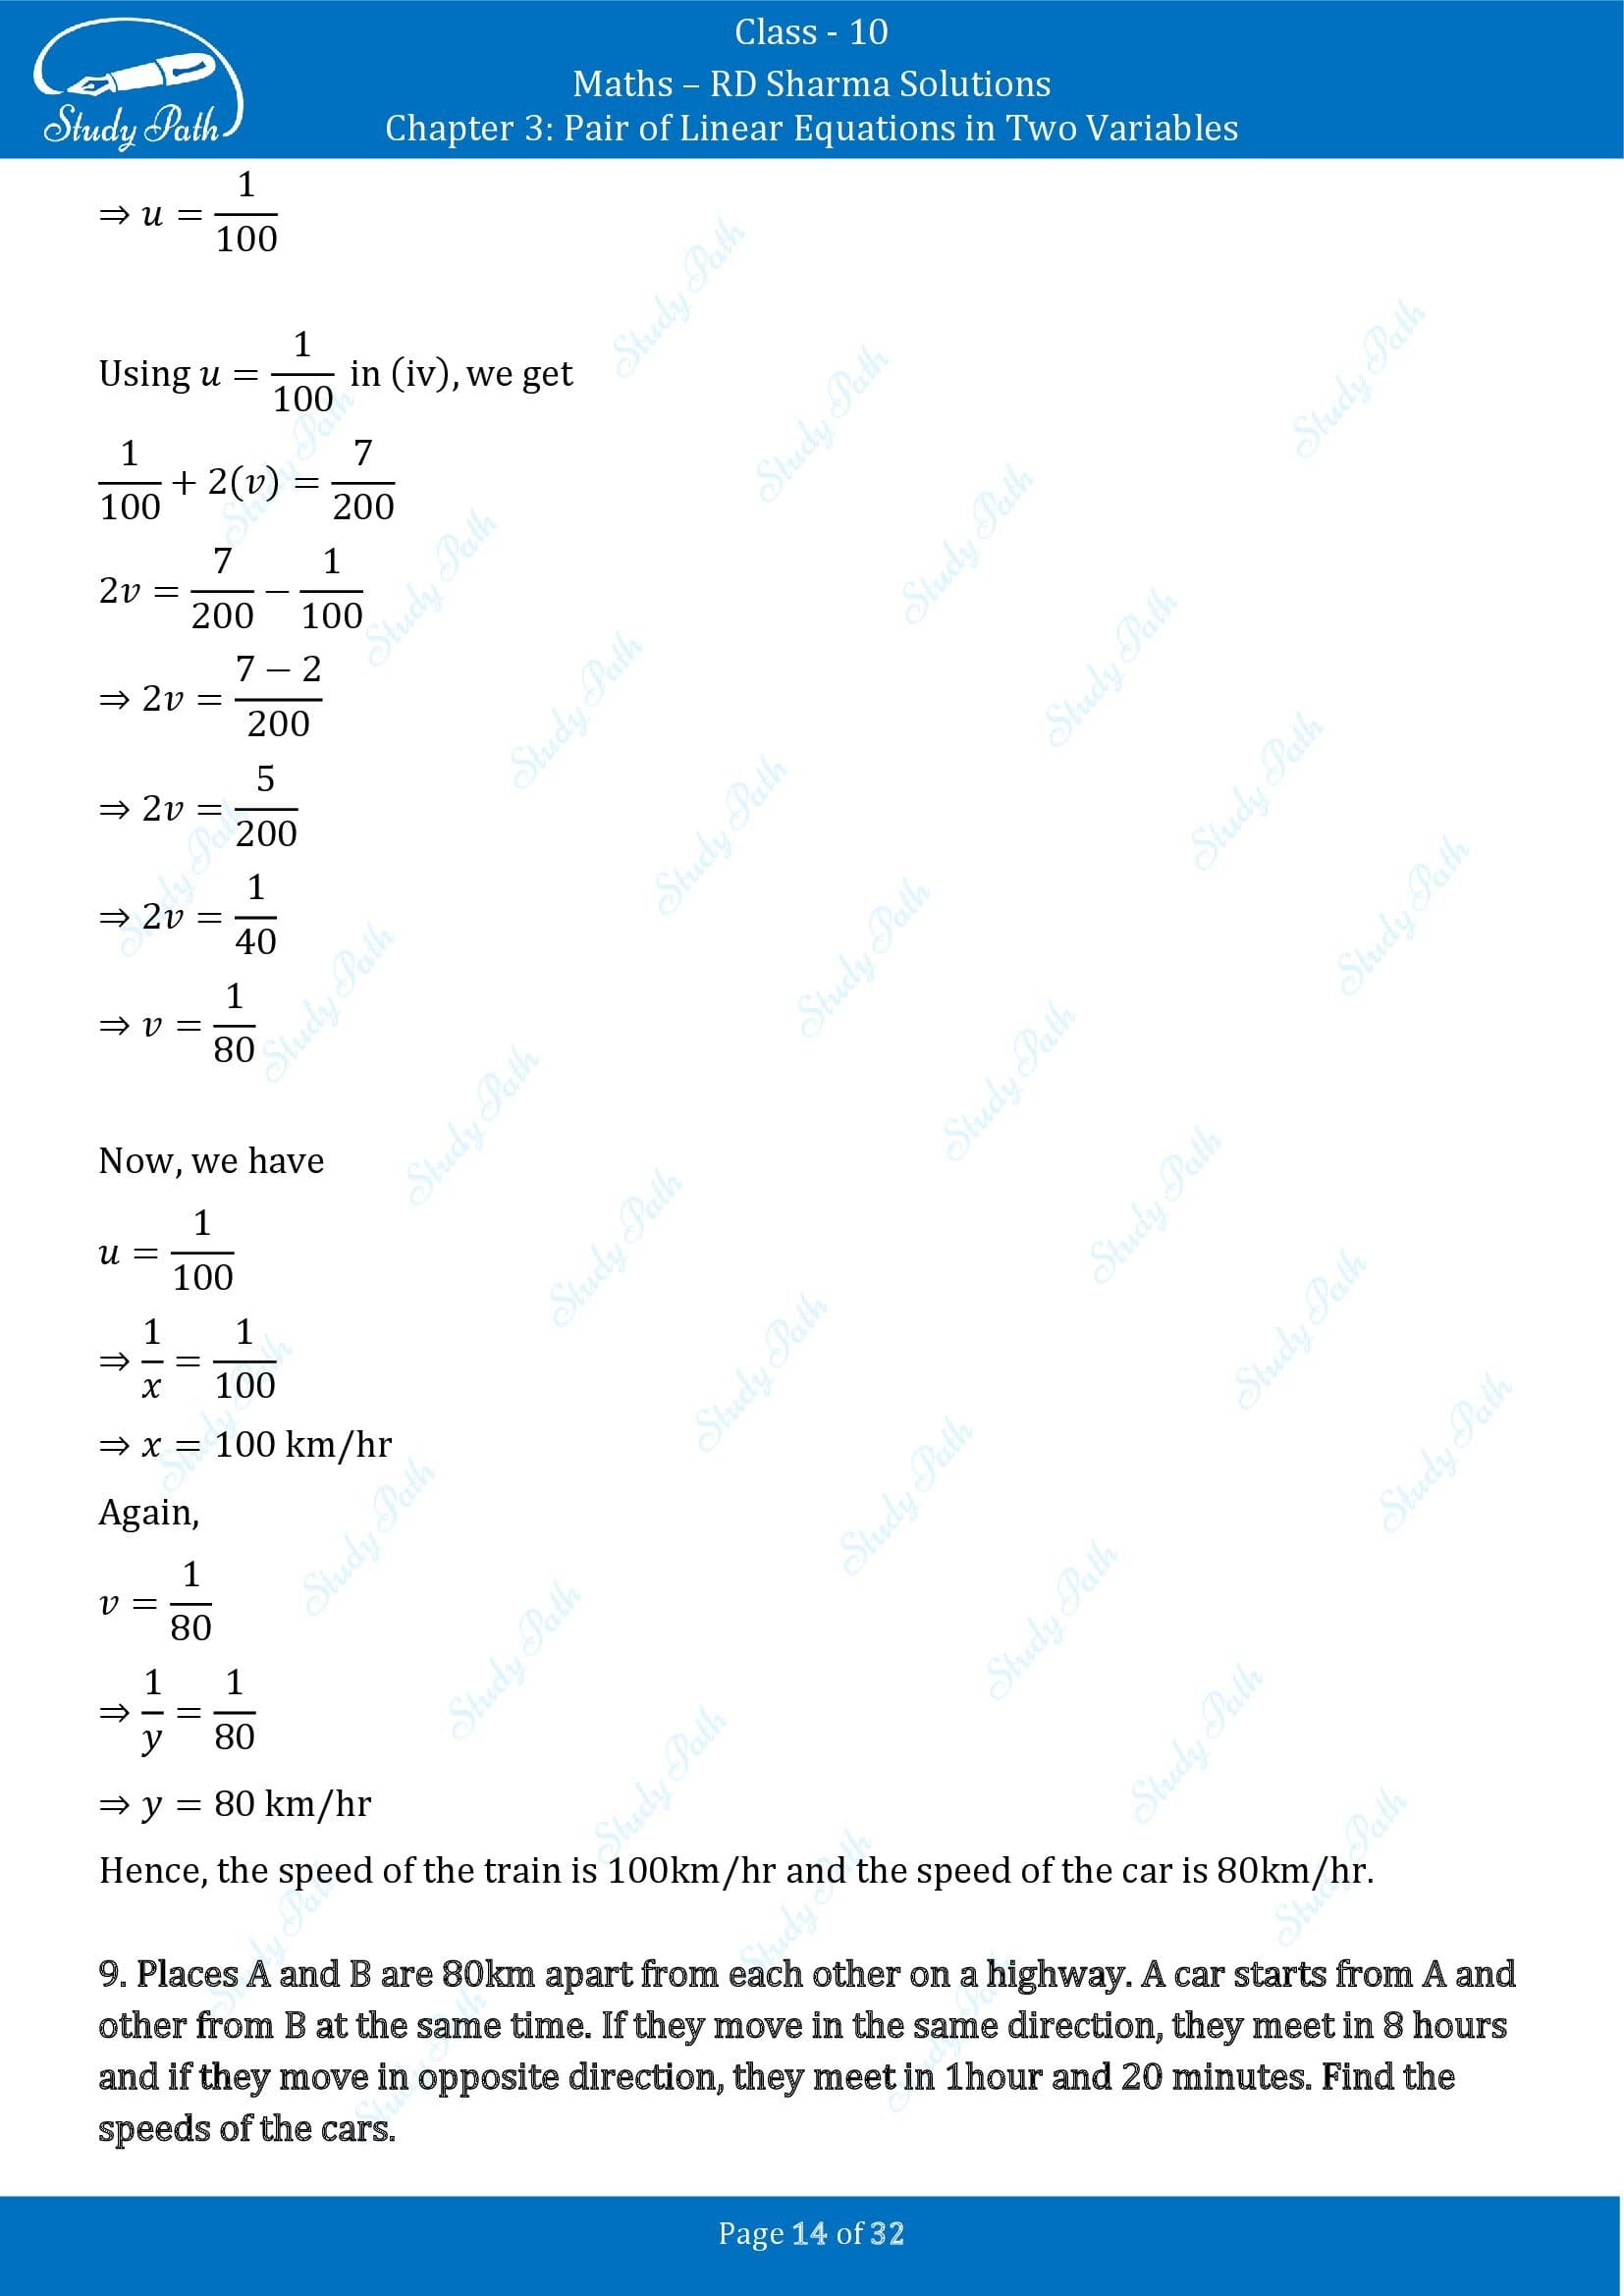 RD Sharma Solutions Class 10 Chapter 3 Pair of Linear Equations in Two Variables Exercise 3.10 00014